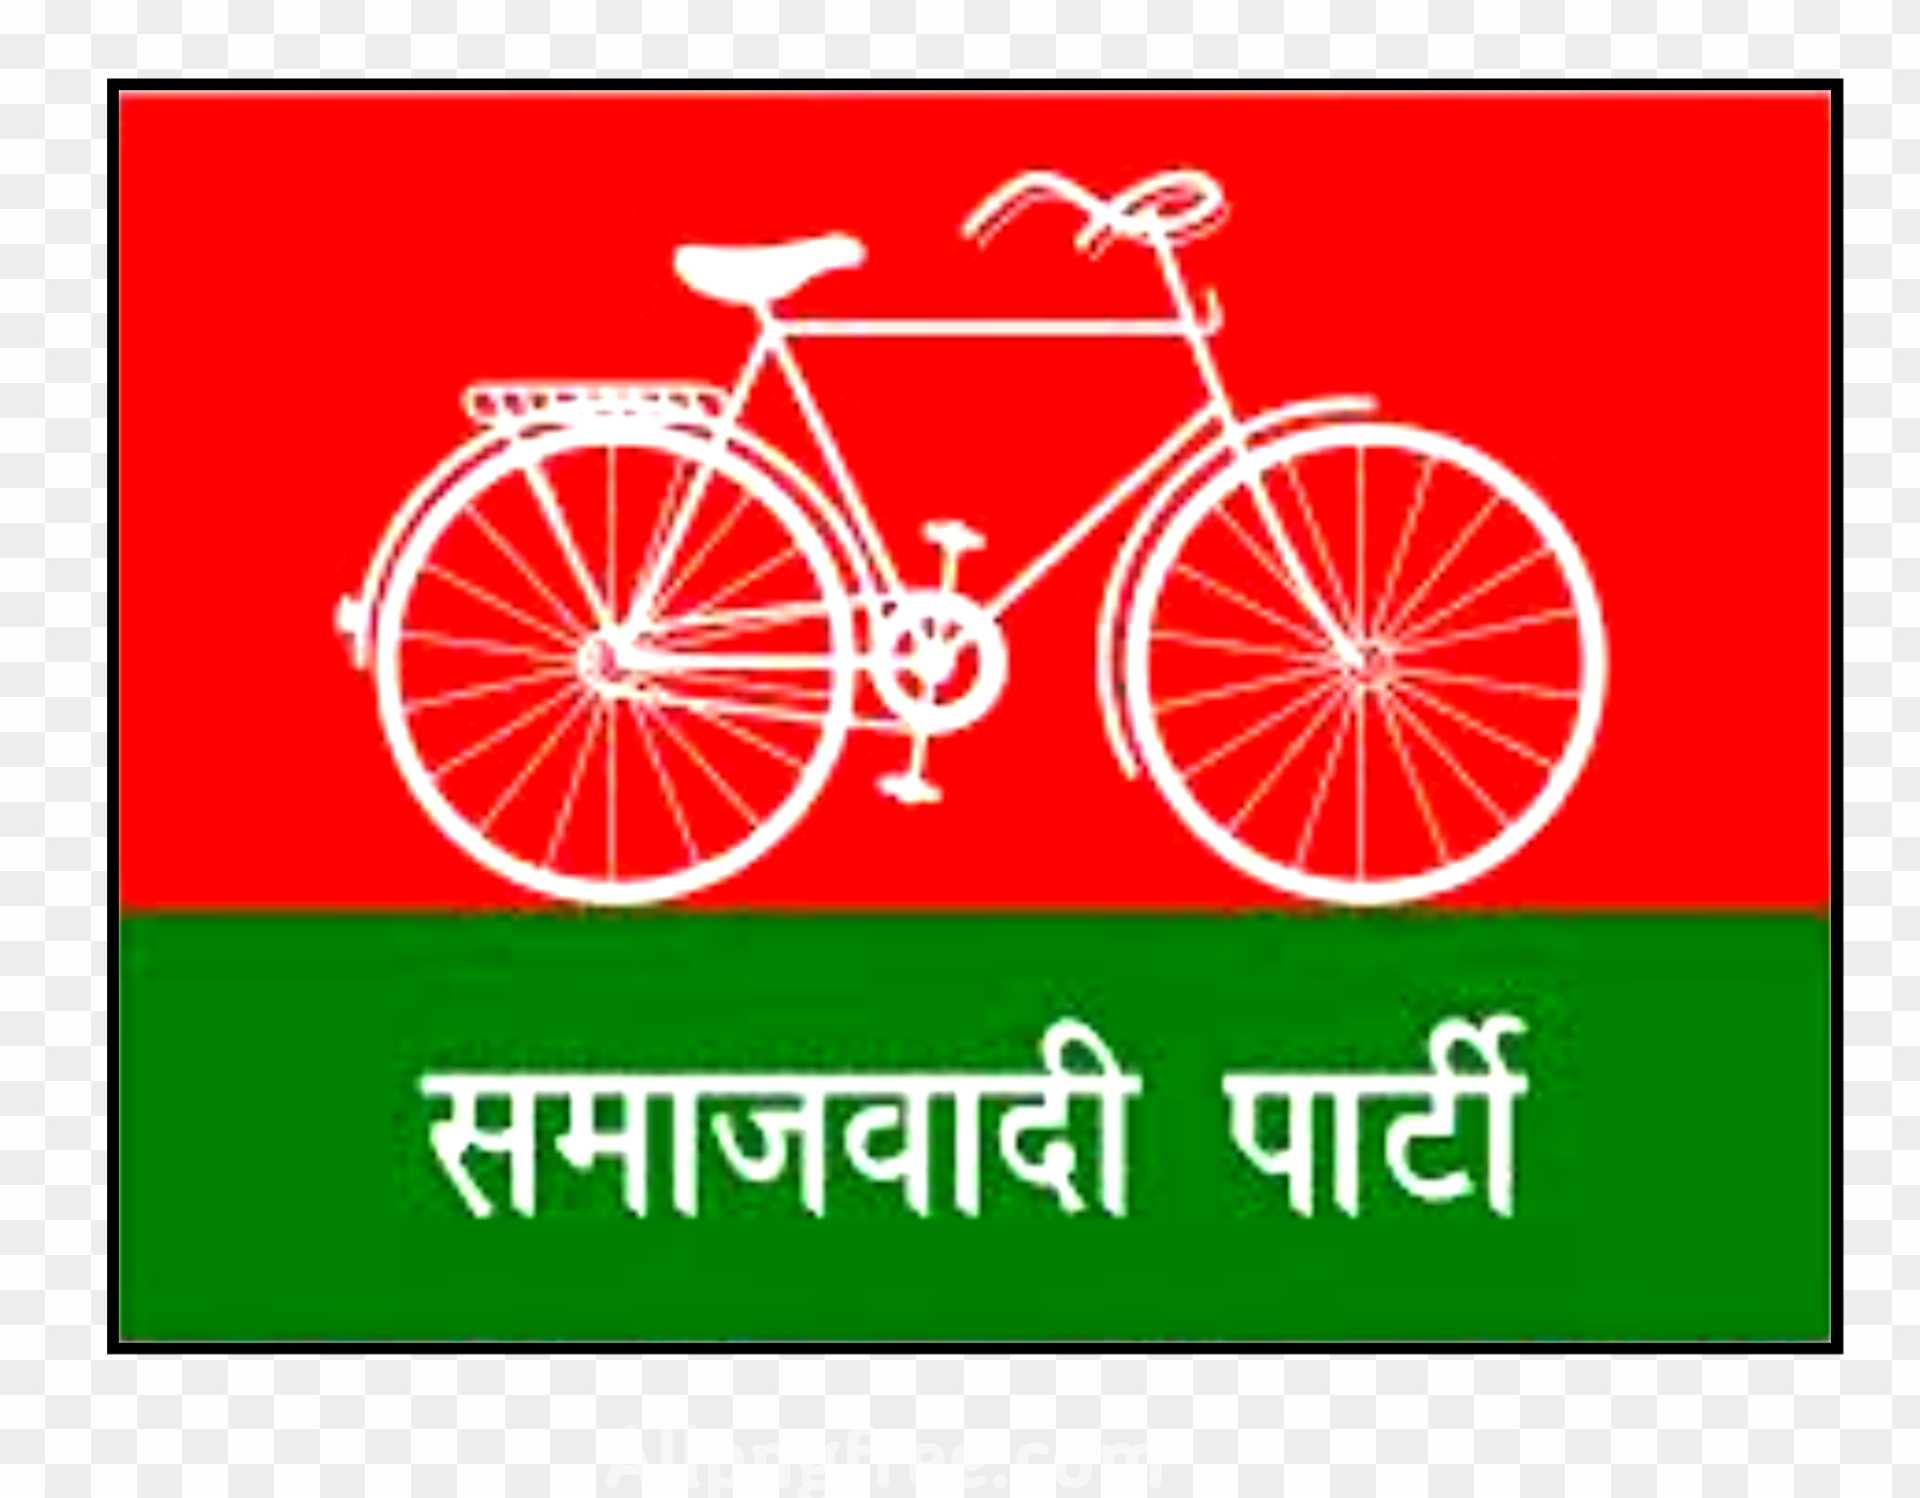 Election Commission to soon decide on 'cycle' symbol based on precedents,  principles | India News - The Indian Express